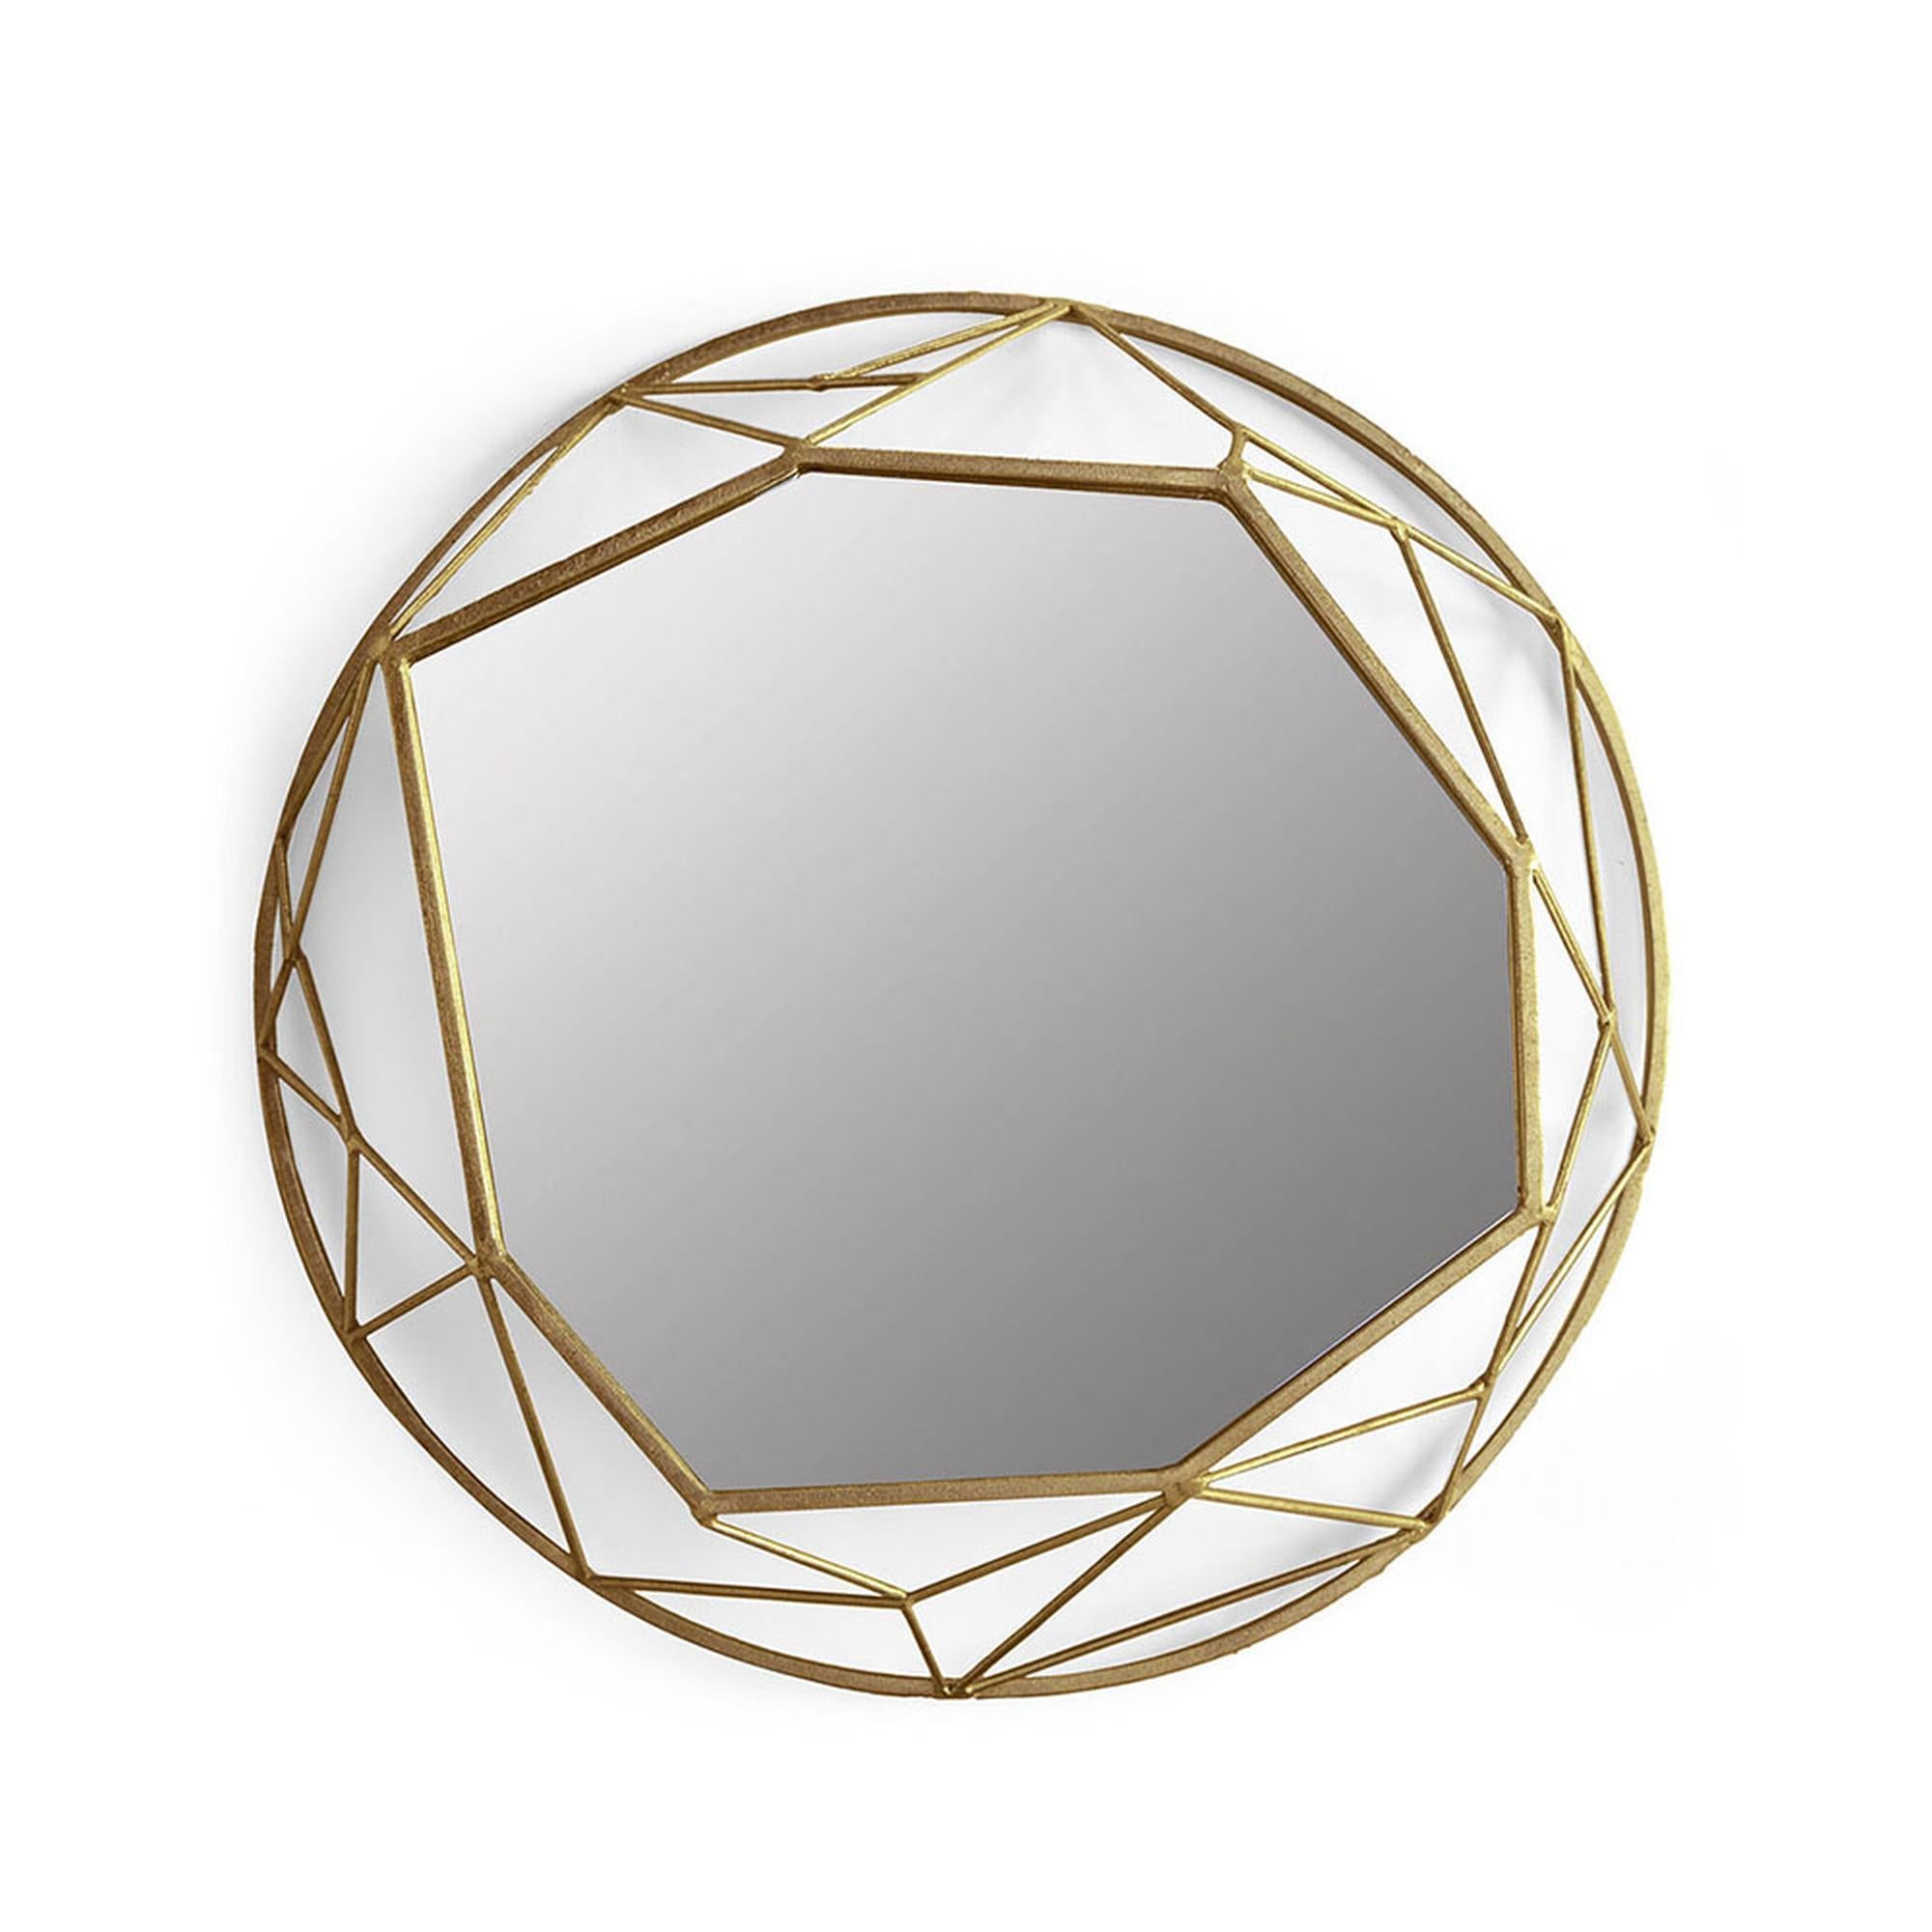 Mexican Mulholland Mirror in Gold Leaf by Innova Luxuxy Group For Sale